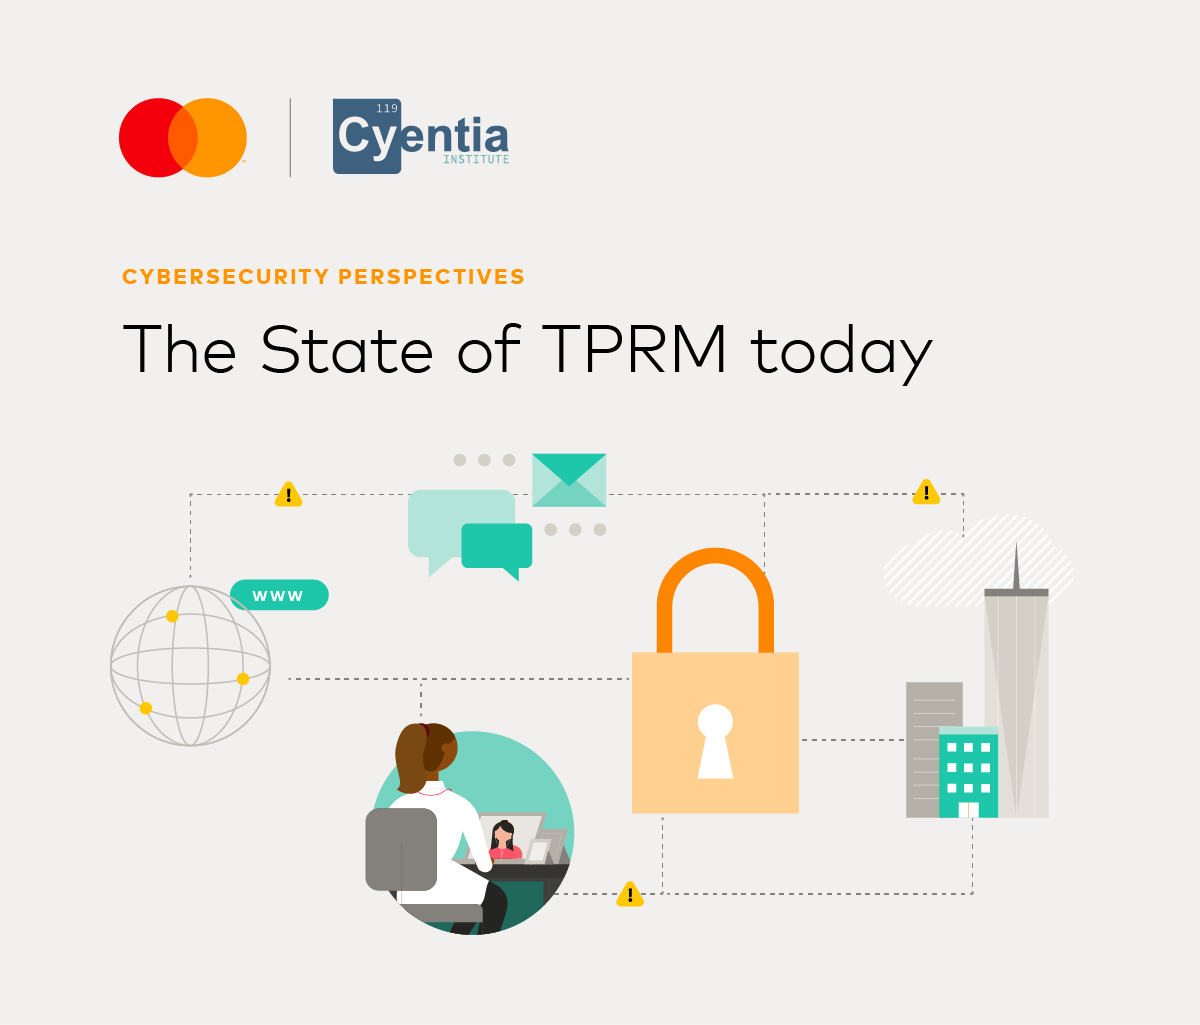 The state of TPRM today